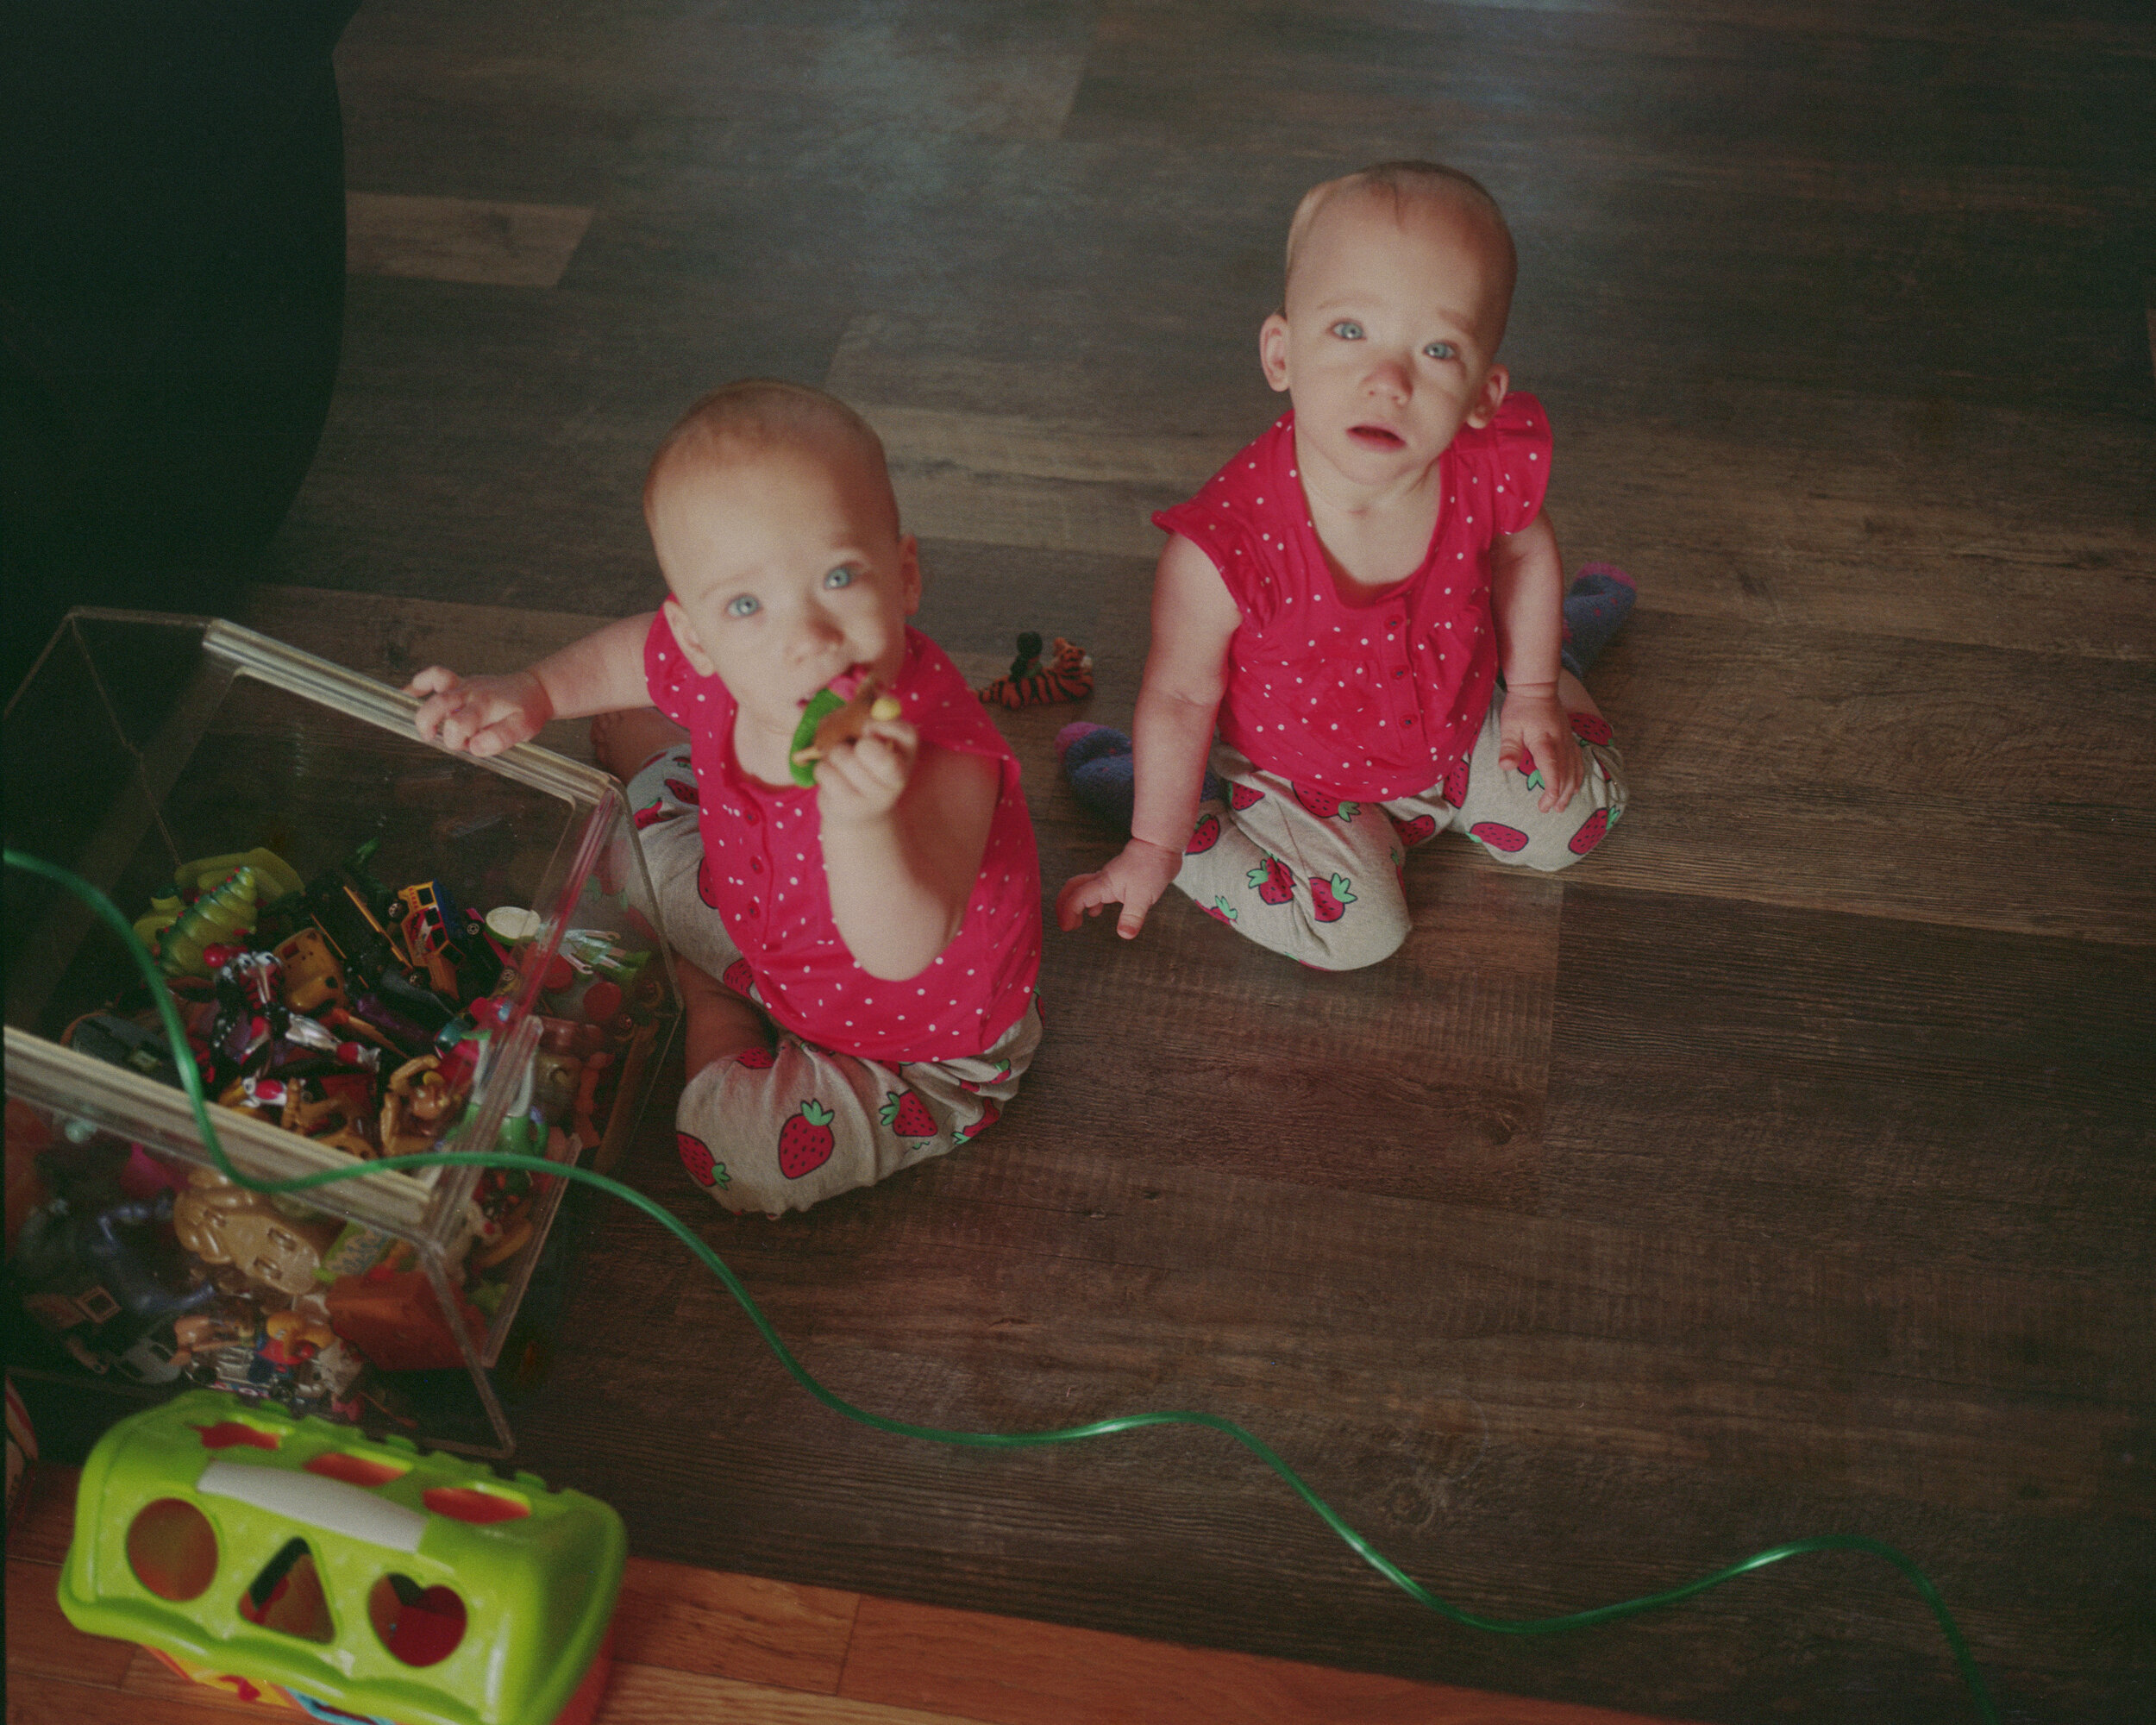 The Twins with Kevin's Oxygen Cords